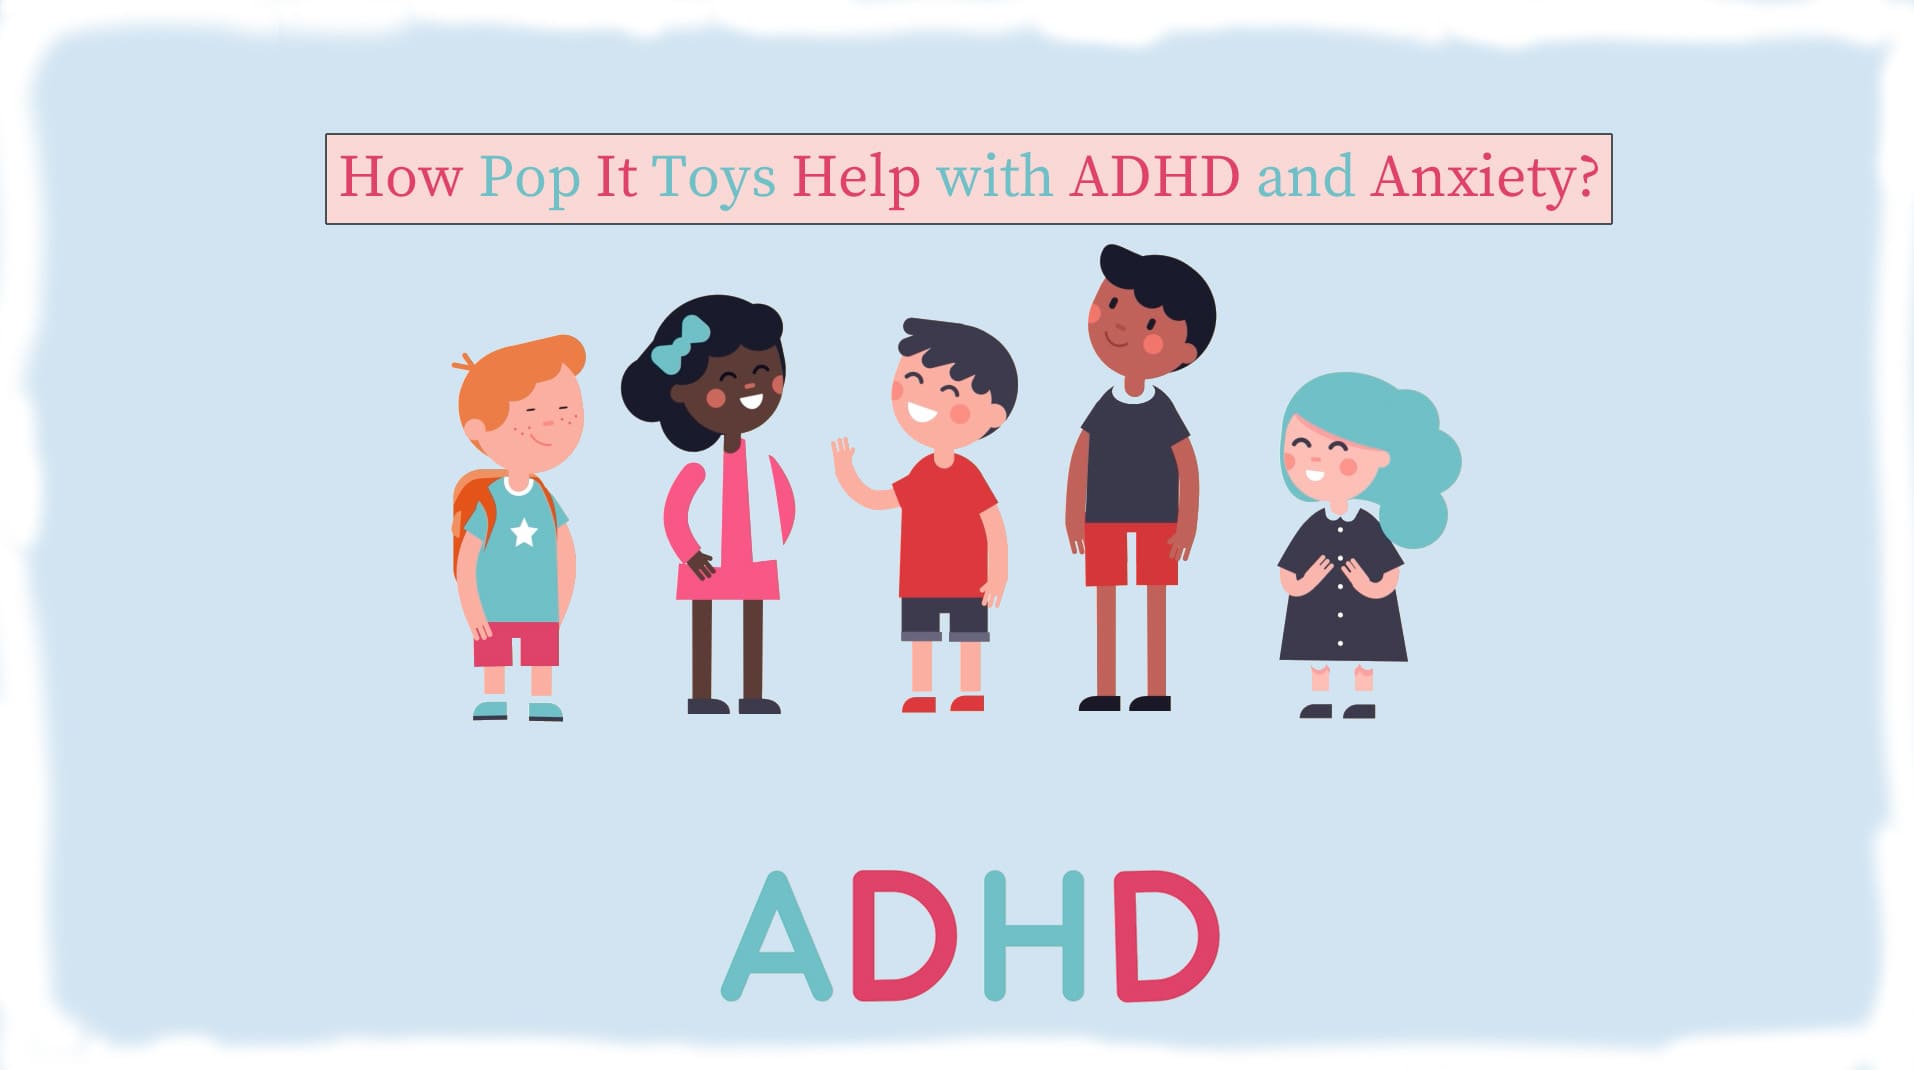 Pop It help with ADHD and Anxiety